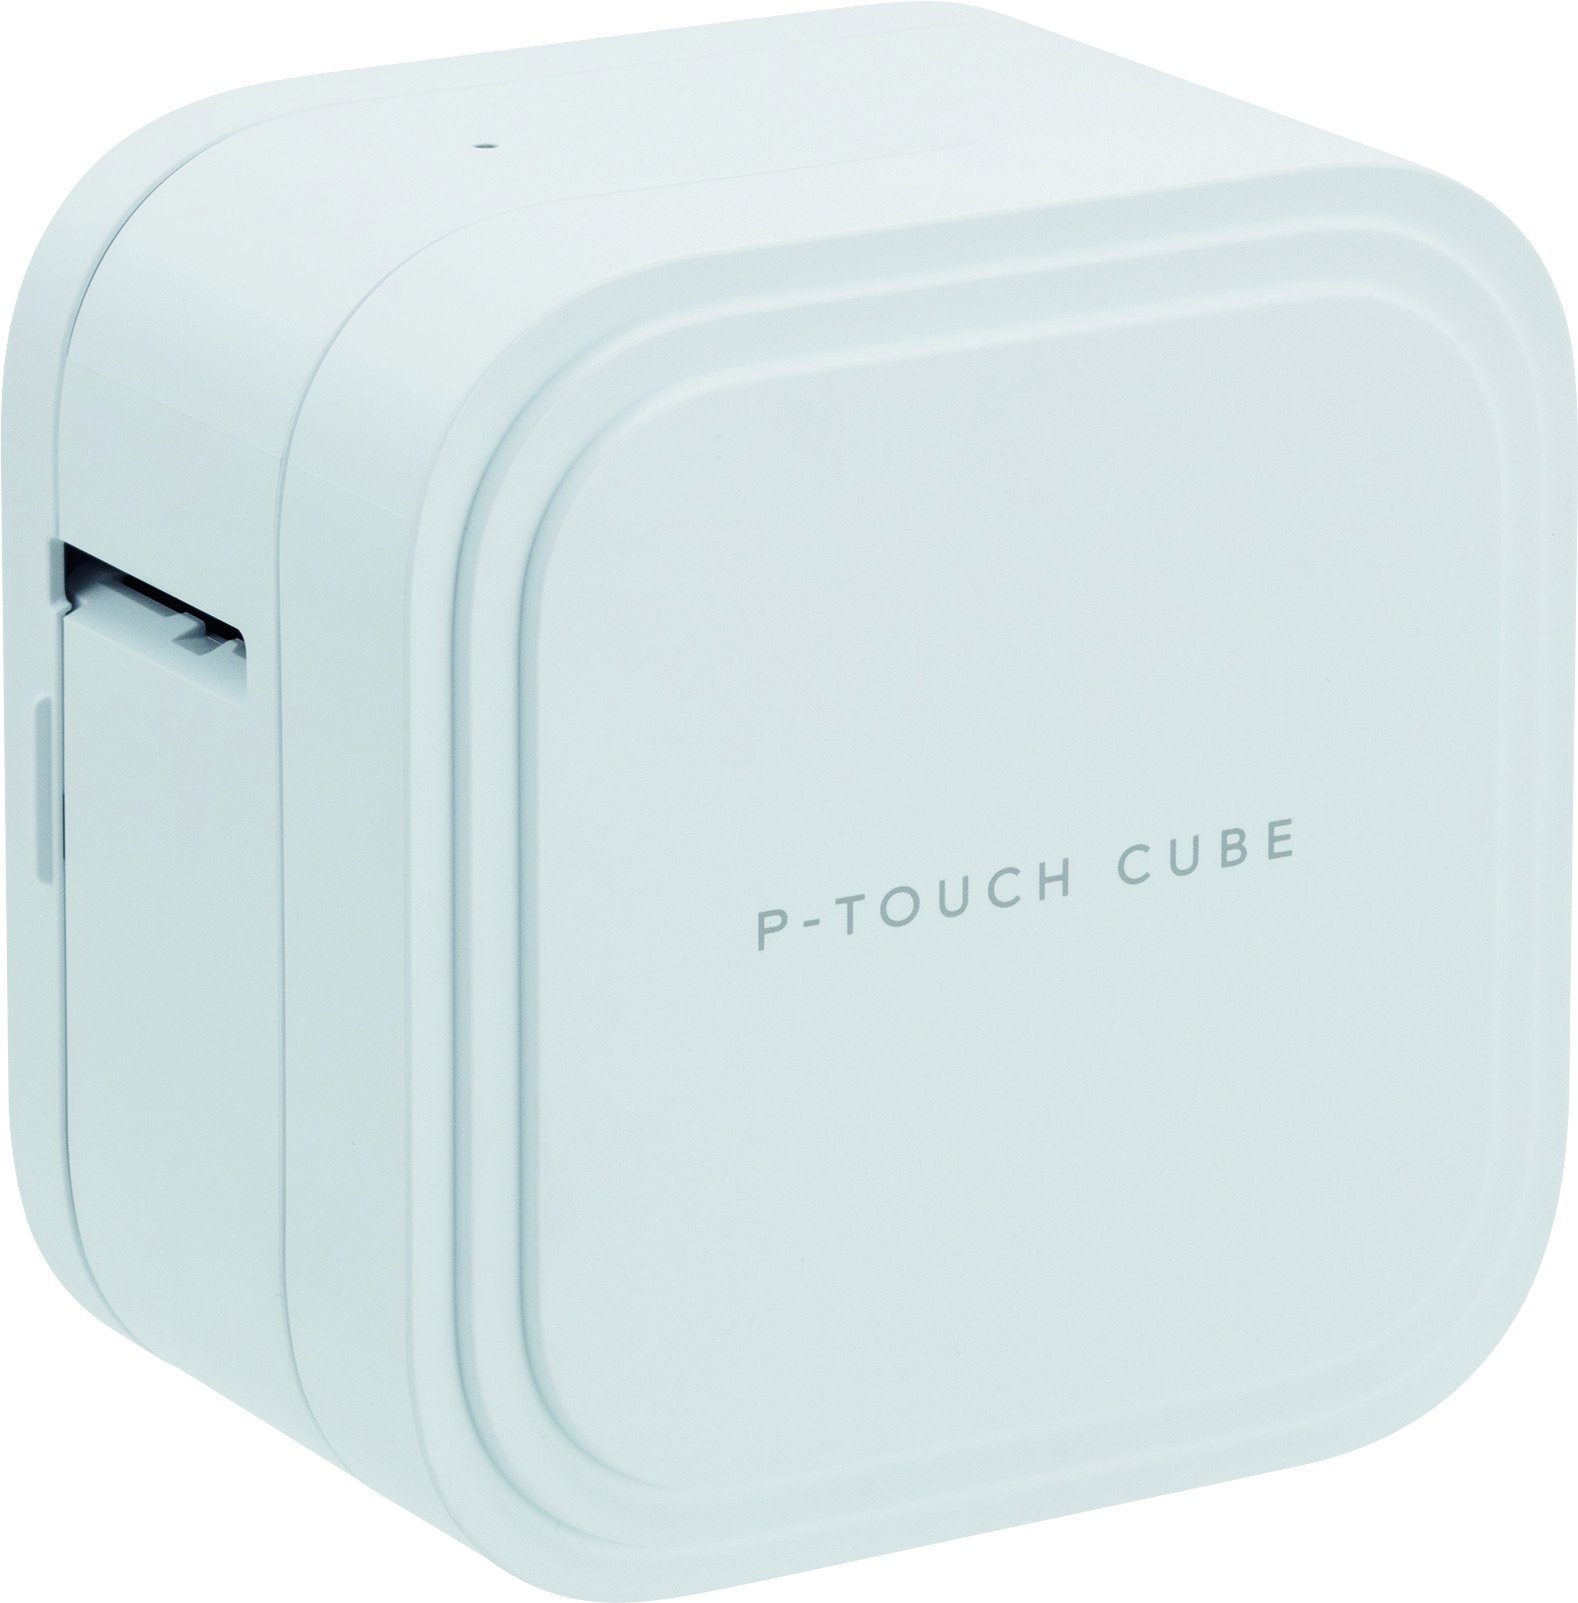 Brother-P-touch-CUBE-Pro-Professionelles-Beschriftungsgerat